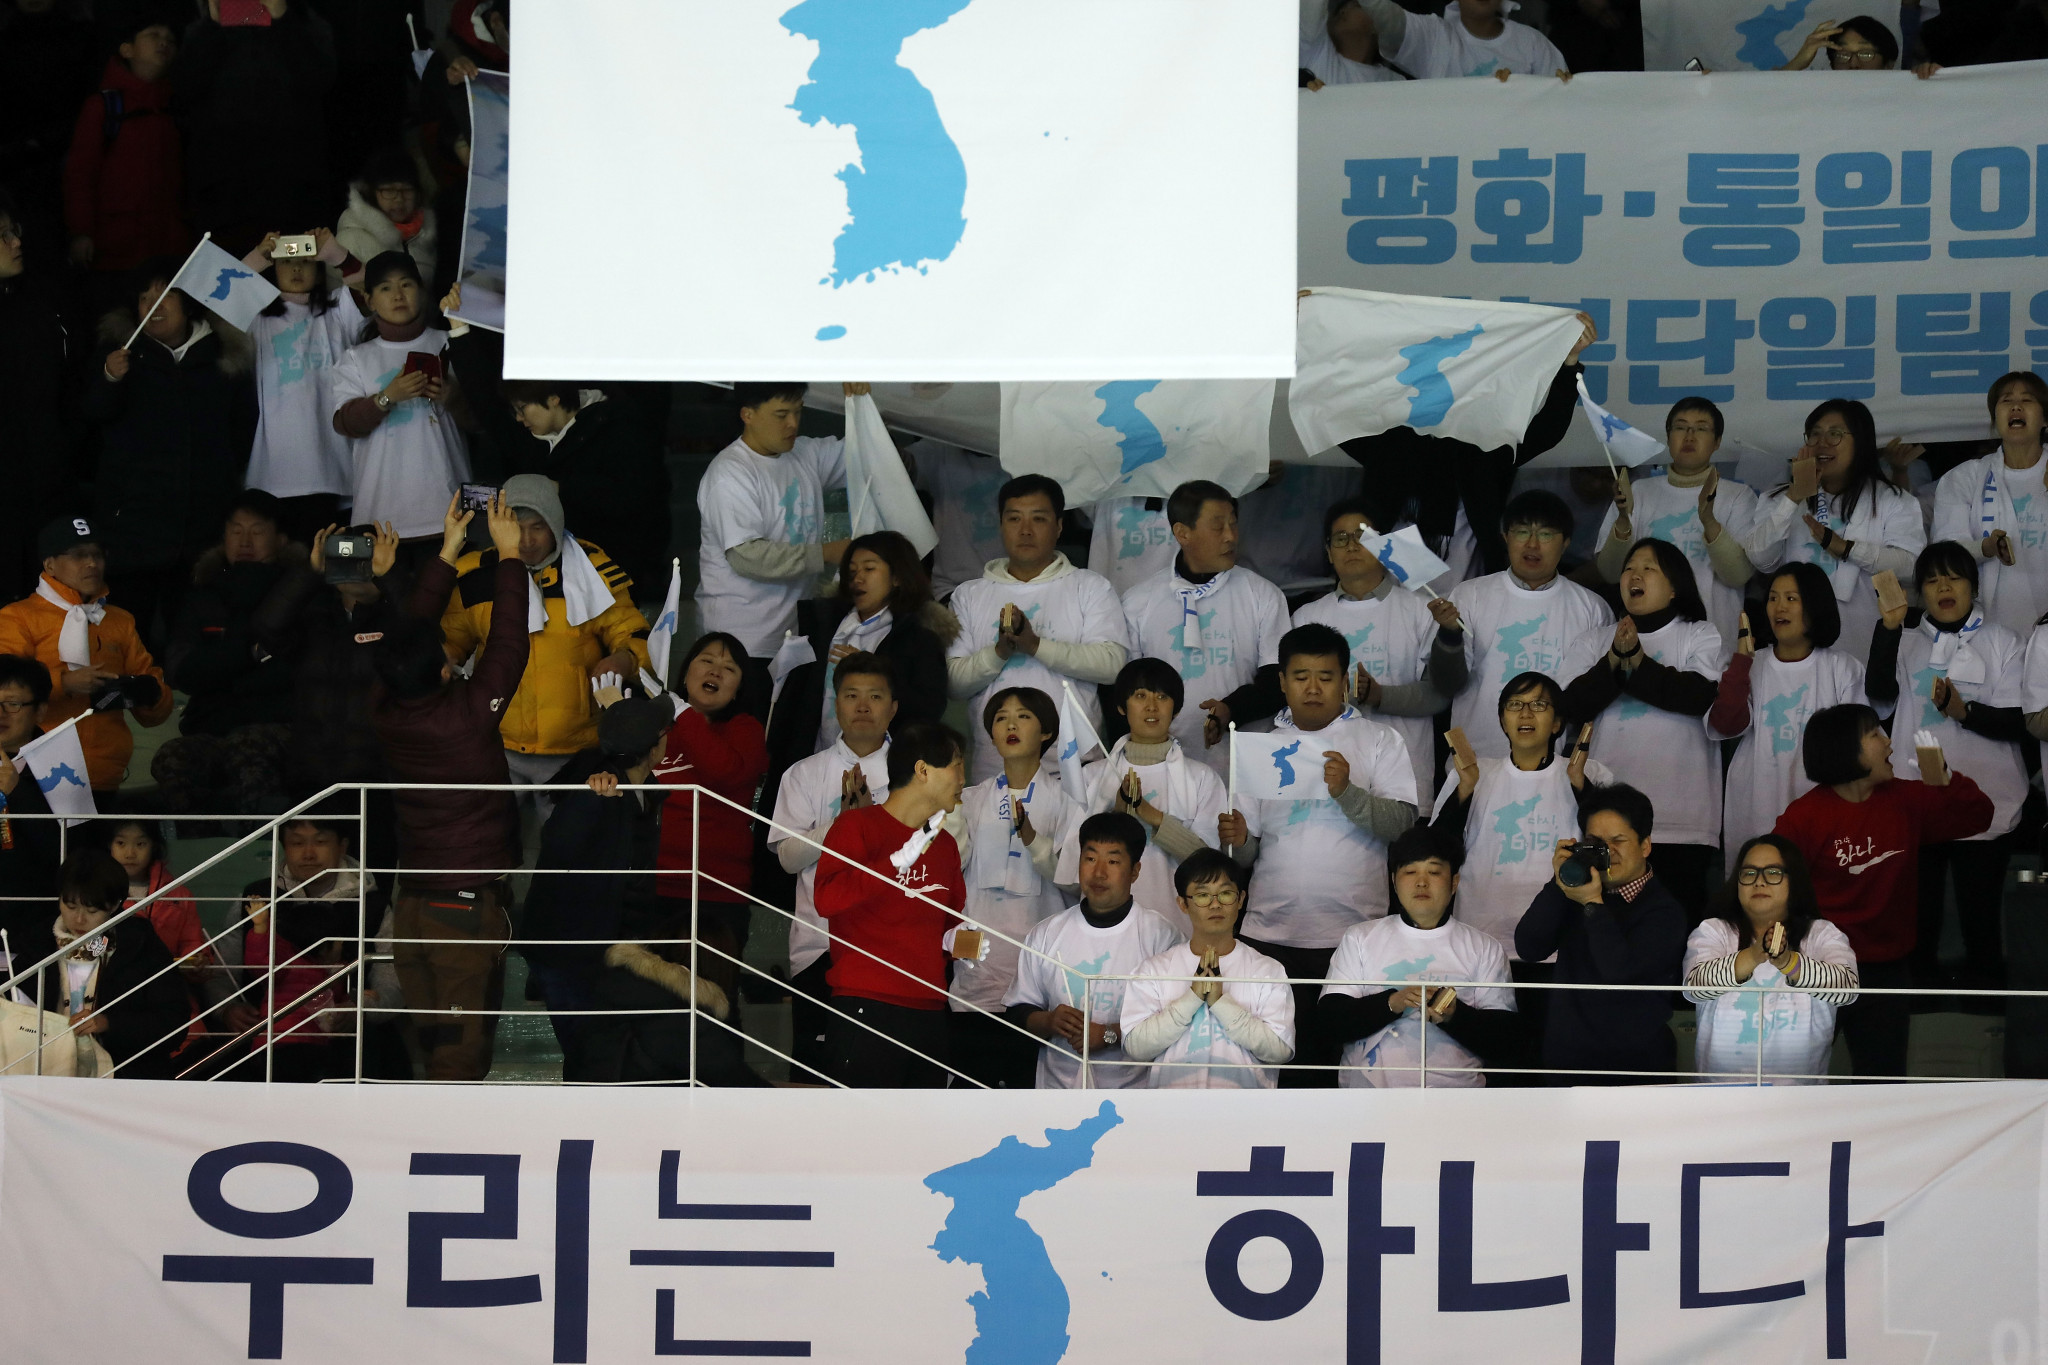 Many supporters at the ice hockey match featuring the Korean unified women's team and Sweden in Incheon were waving the disputed flag, which has caused anger in Japan ©Getty Images